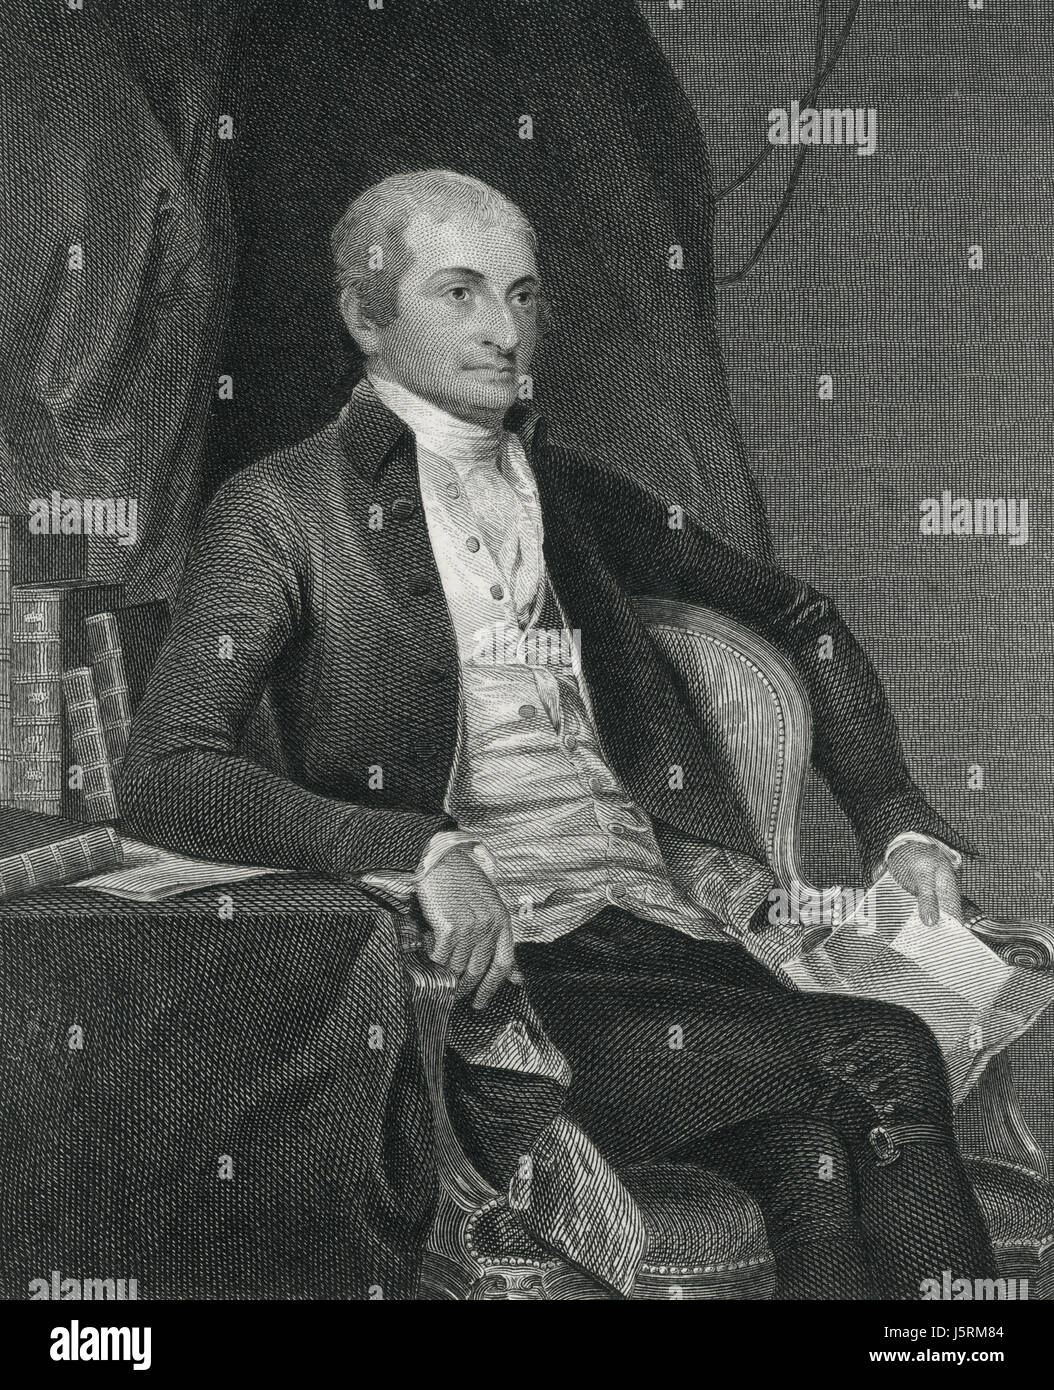 John Jay (1745-1829), American Statesman, Patriot, Diplomat, one of the Founding Fathers of the United States and First Chief Justice of the United States, Portrait, Engraving Stock Photo